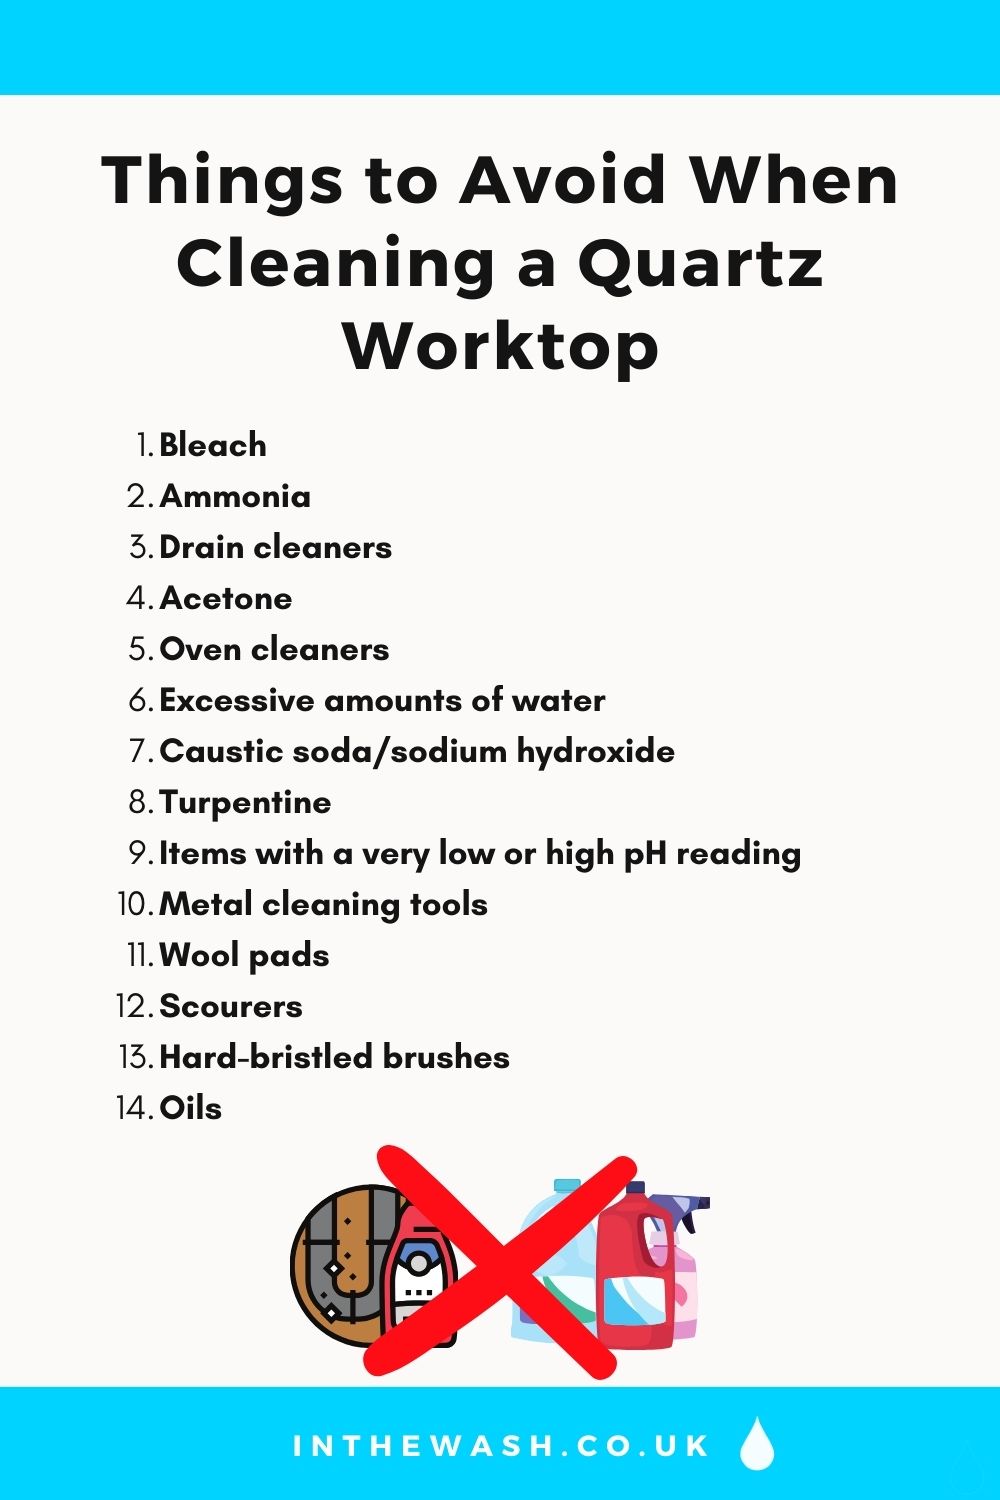 Things to avoid when cleaning a quartz worktop